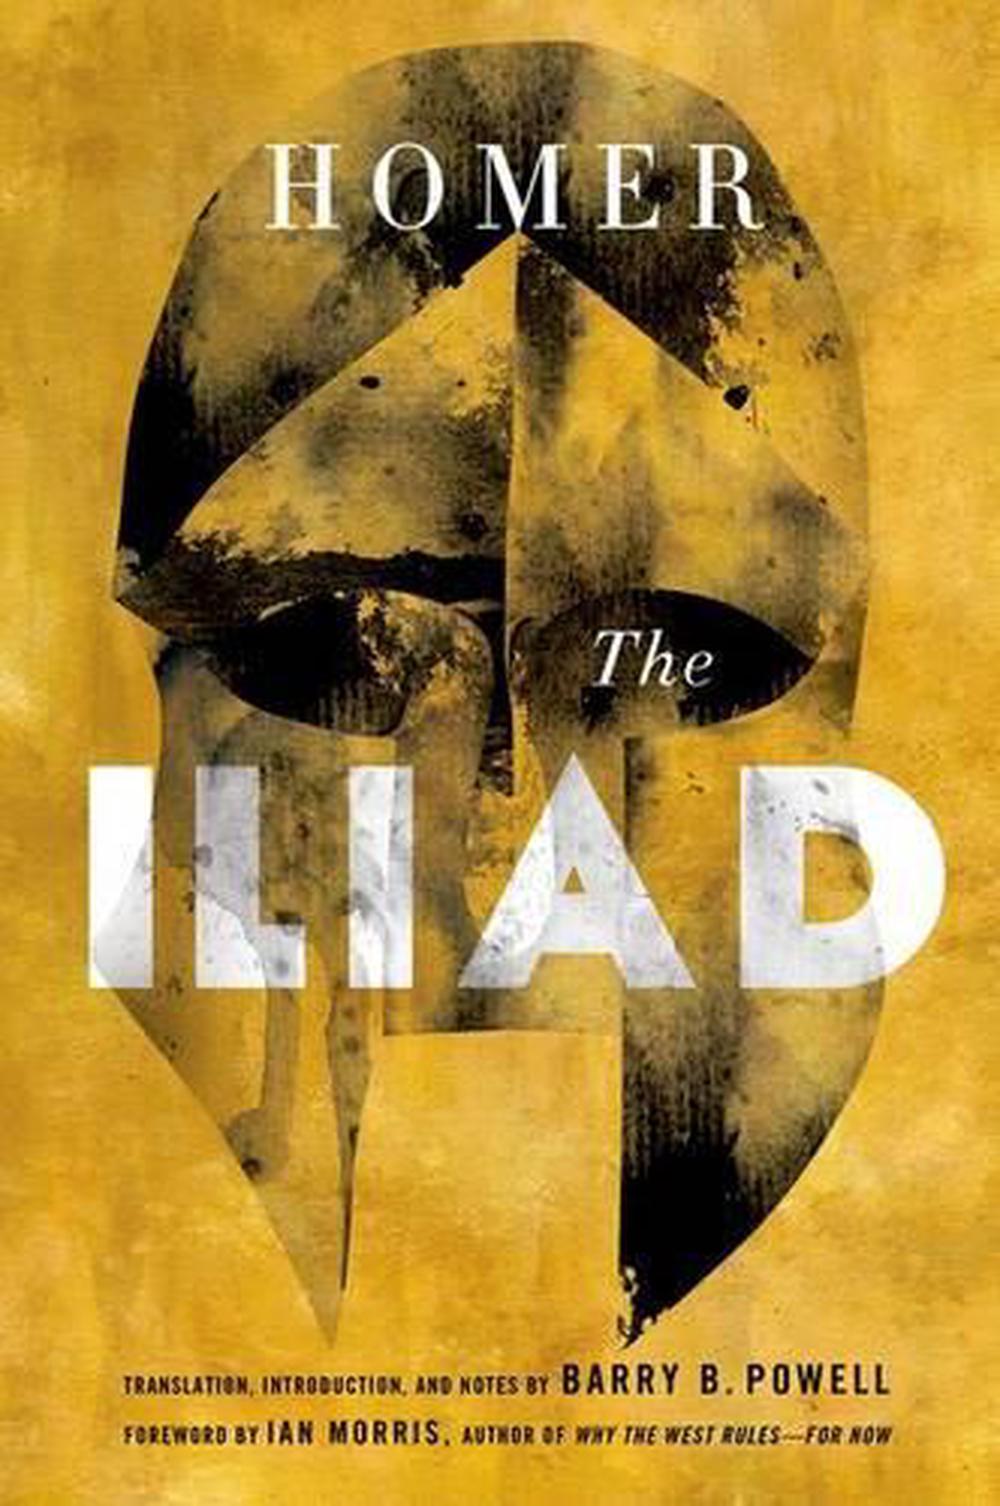 the iliad and the odyssey hardcover